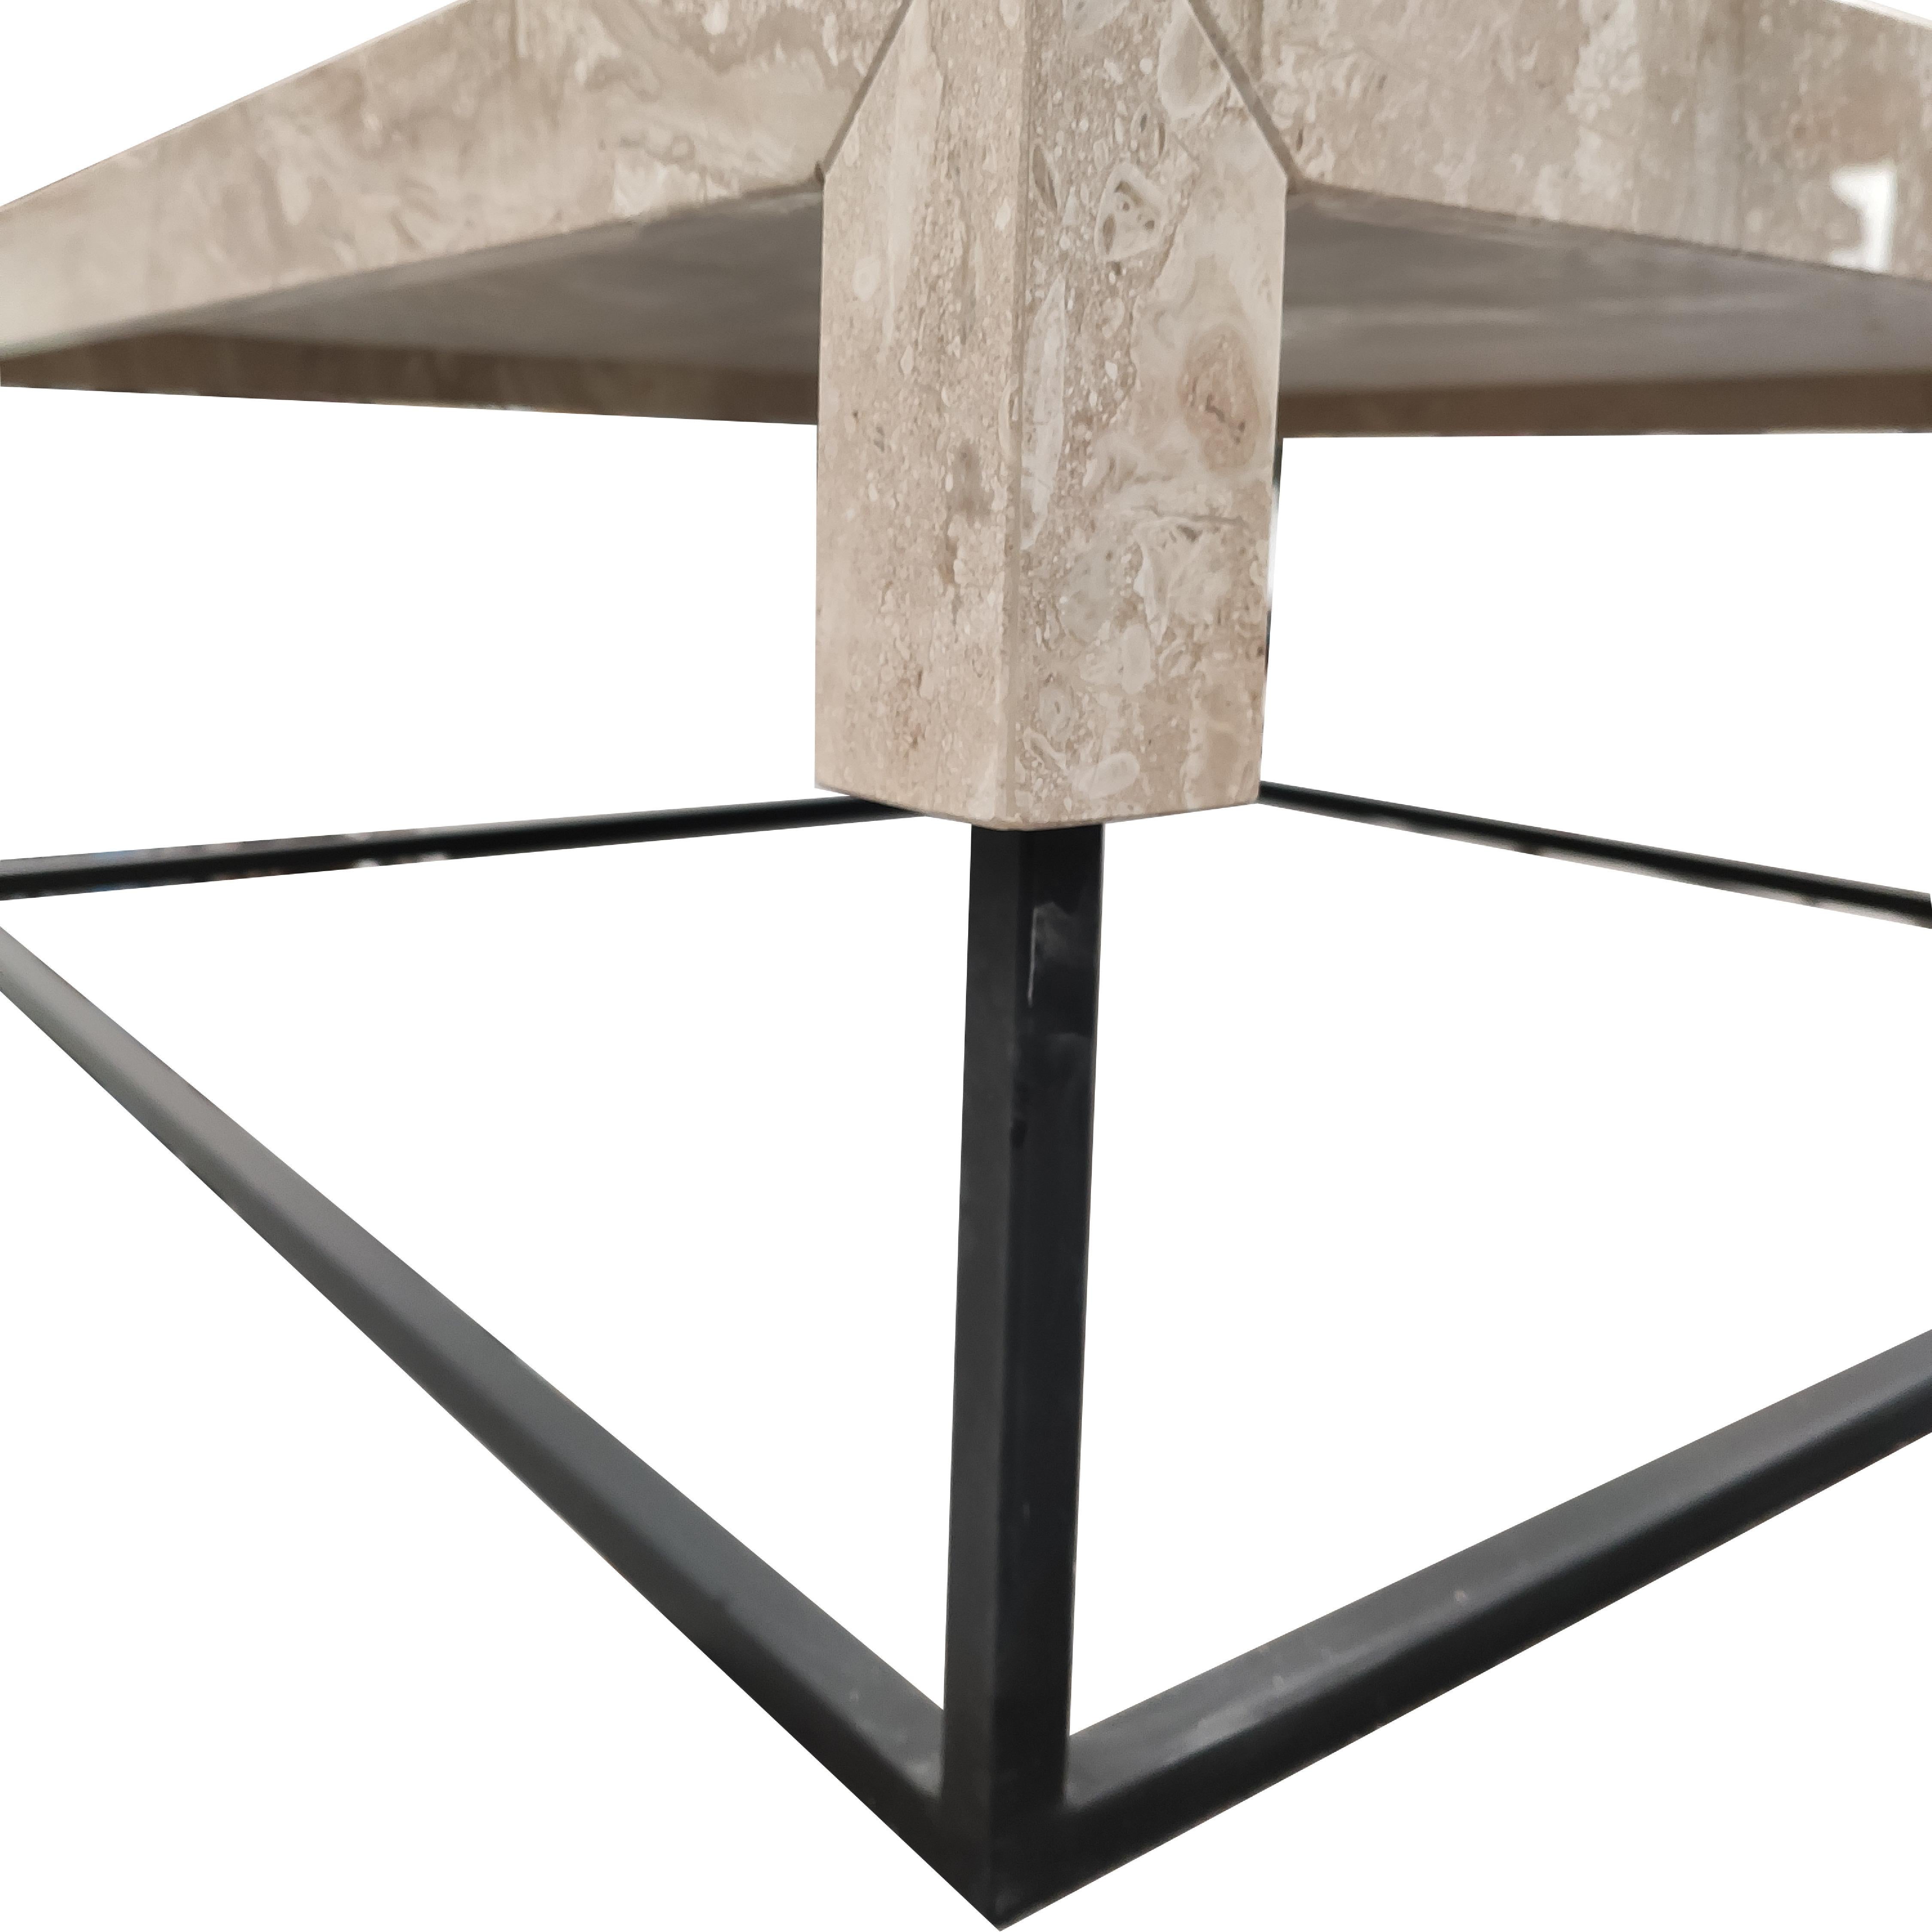 The Daino Reale TOSSA coffee table is a piece of contemporary designer furniture in marble. It is a coffee table made of Daino Reale marble, a marble from the Italian island of Sardinia.

The table consists in a black painted metal structure, with